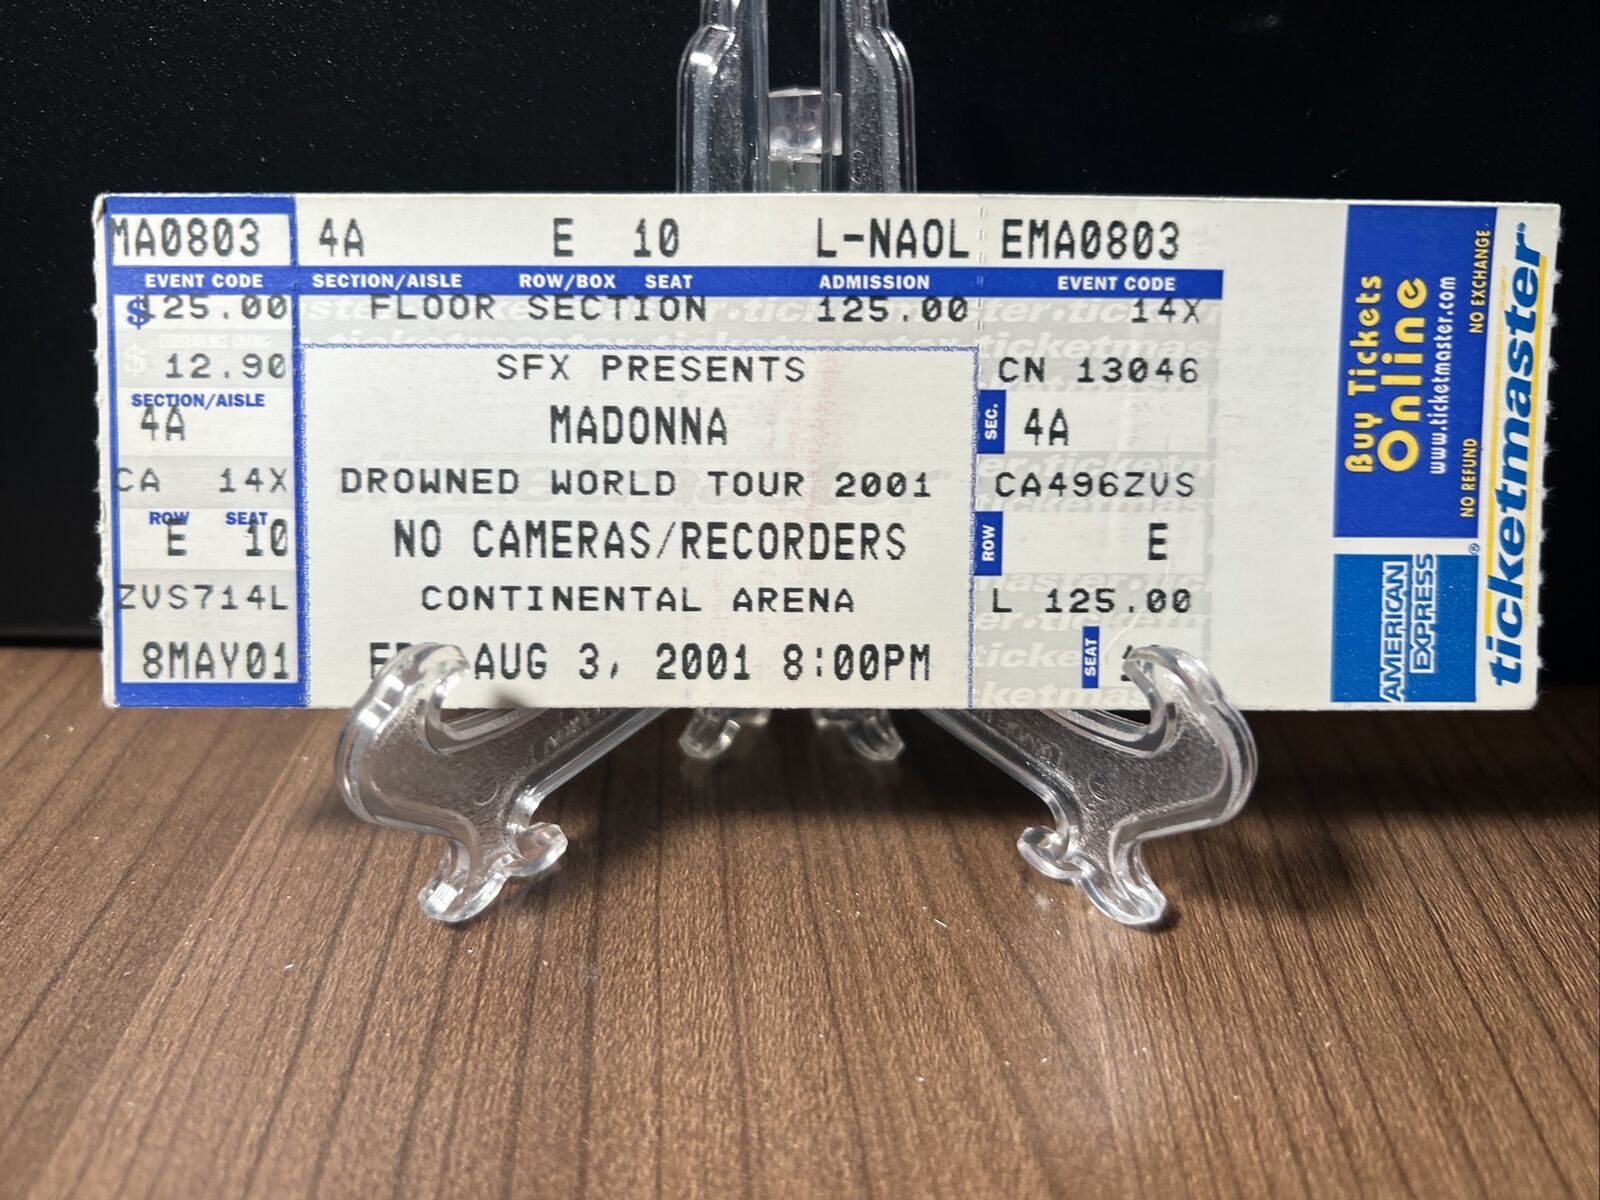 MADONNA CONCERT TICKET Max 65% OFF FULL UNUSED VINTAGE AUGUST 2001 3 CONTI Special Campaign